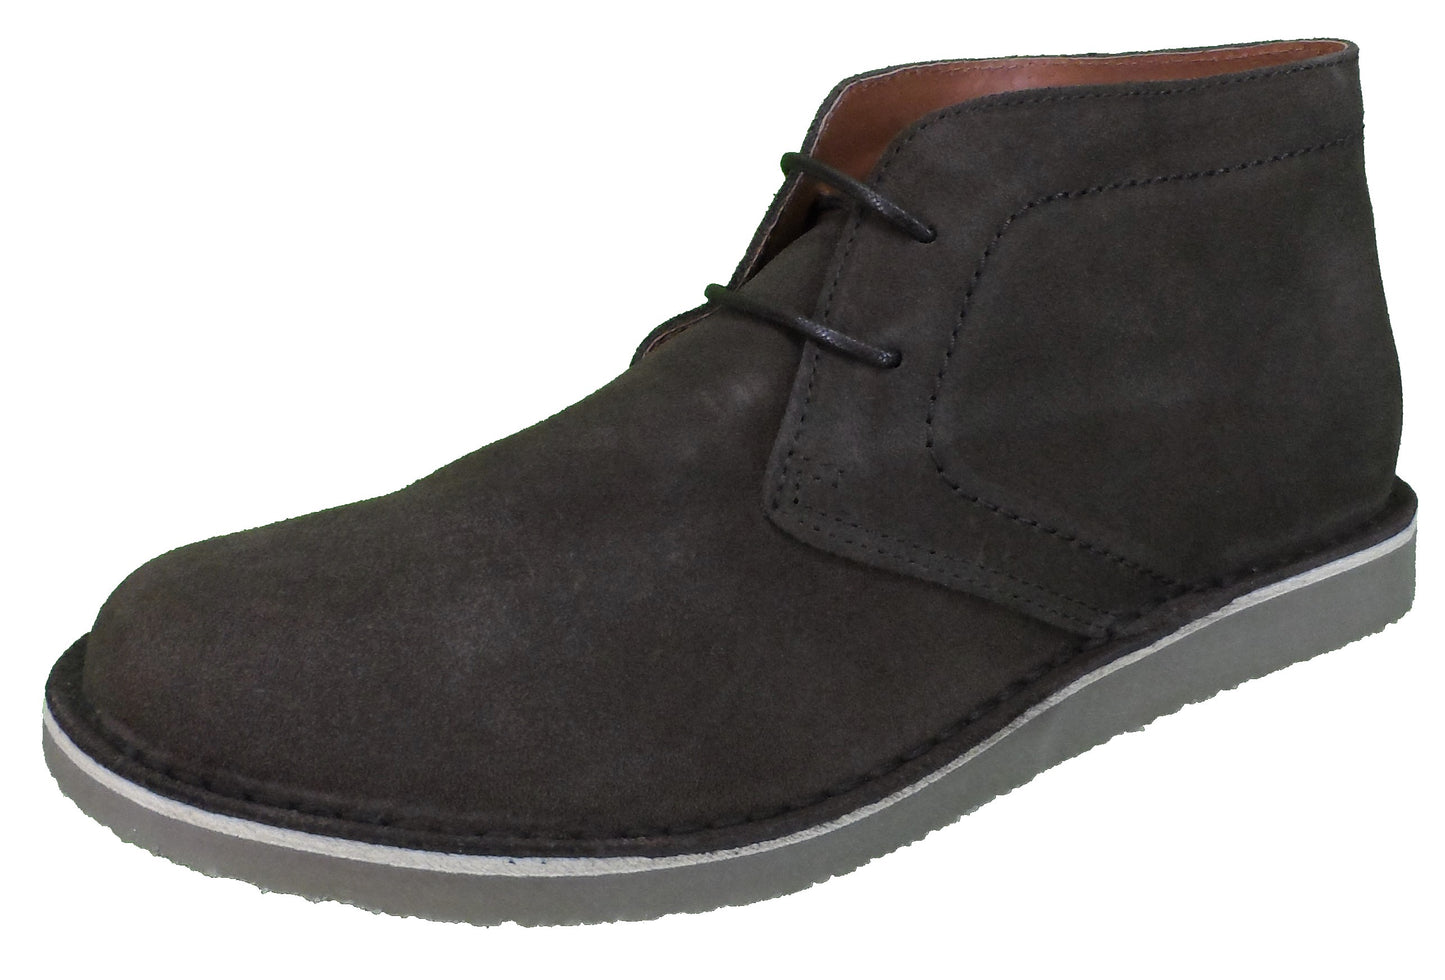 Delicious Junction Gary Crowley Brown Desert Boots